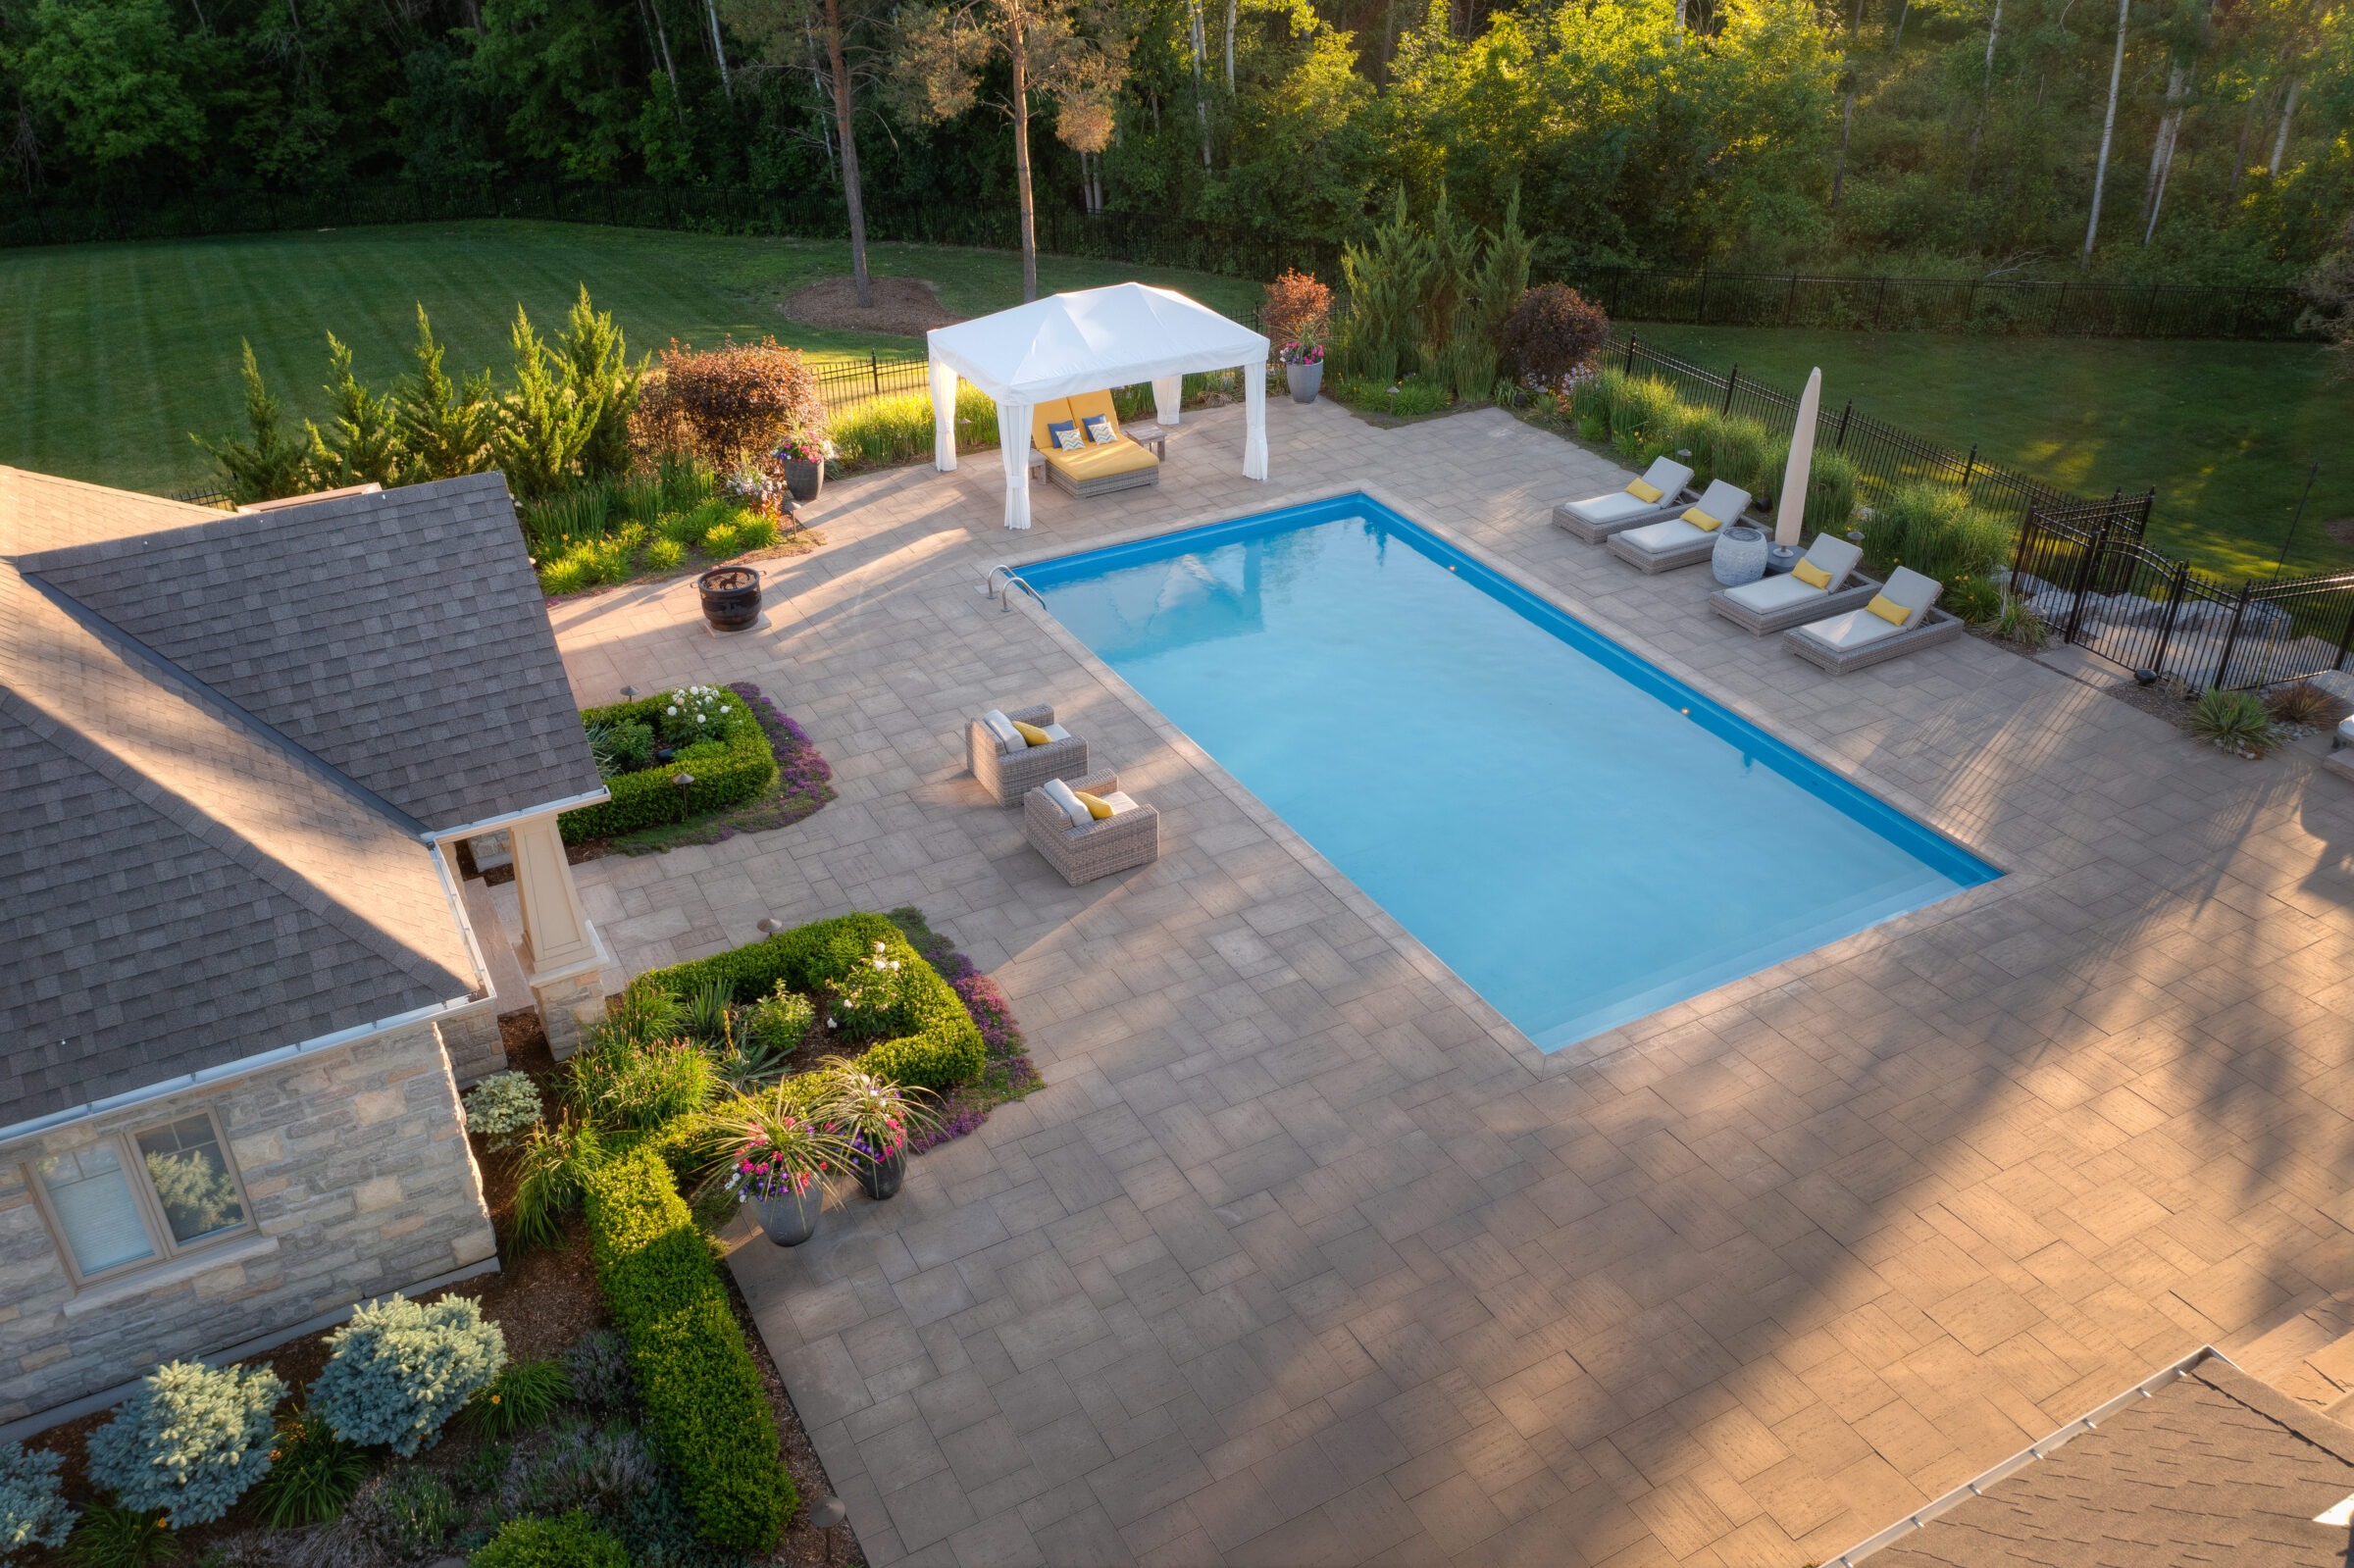 Aerial view of a backyard with a rectangular pool, patio, sun loungers, landscaping, and a pavilion on a sunny day surrounded by trees.